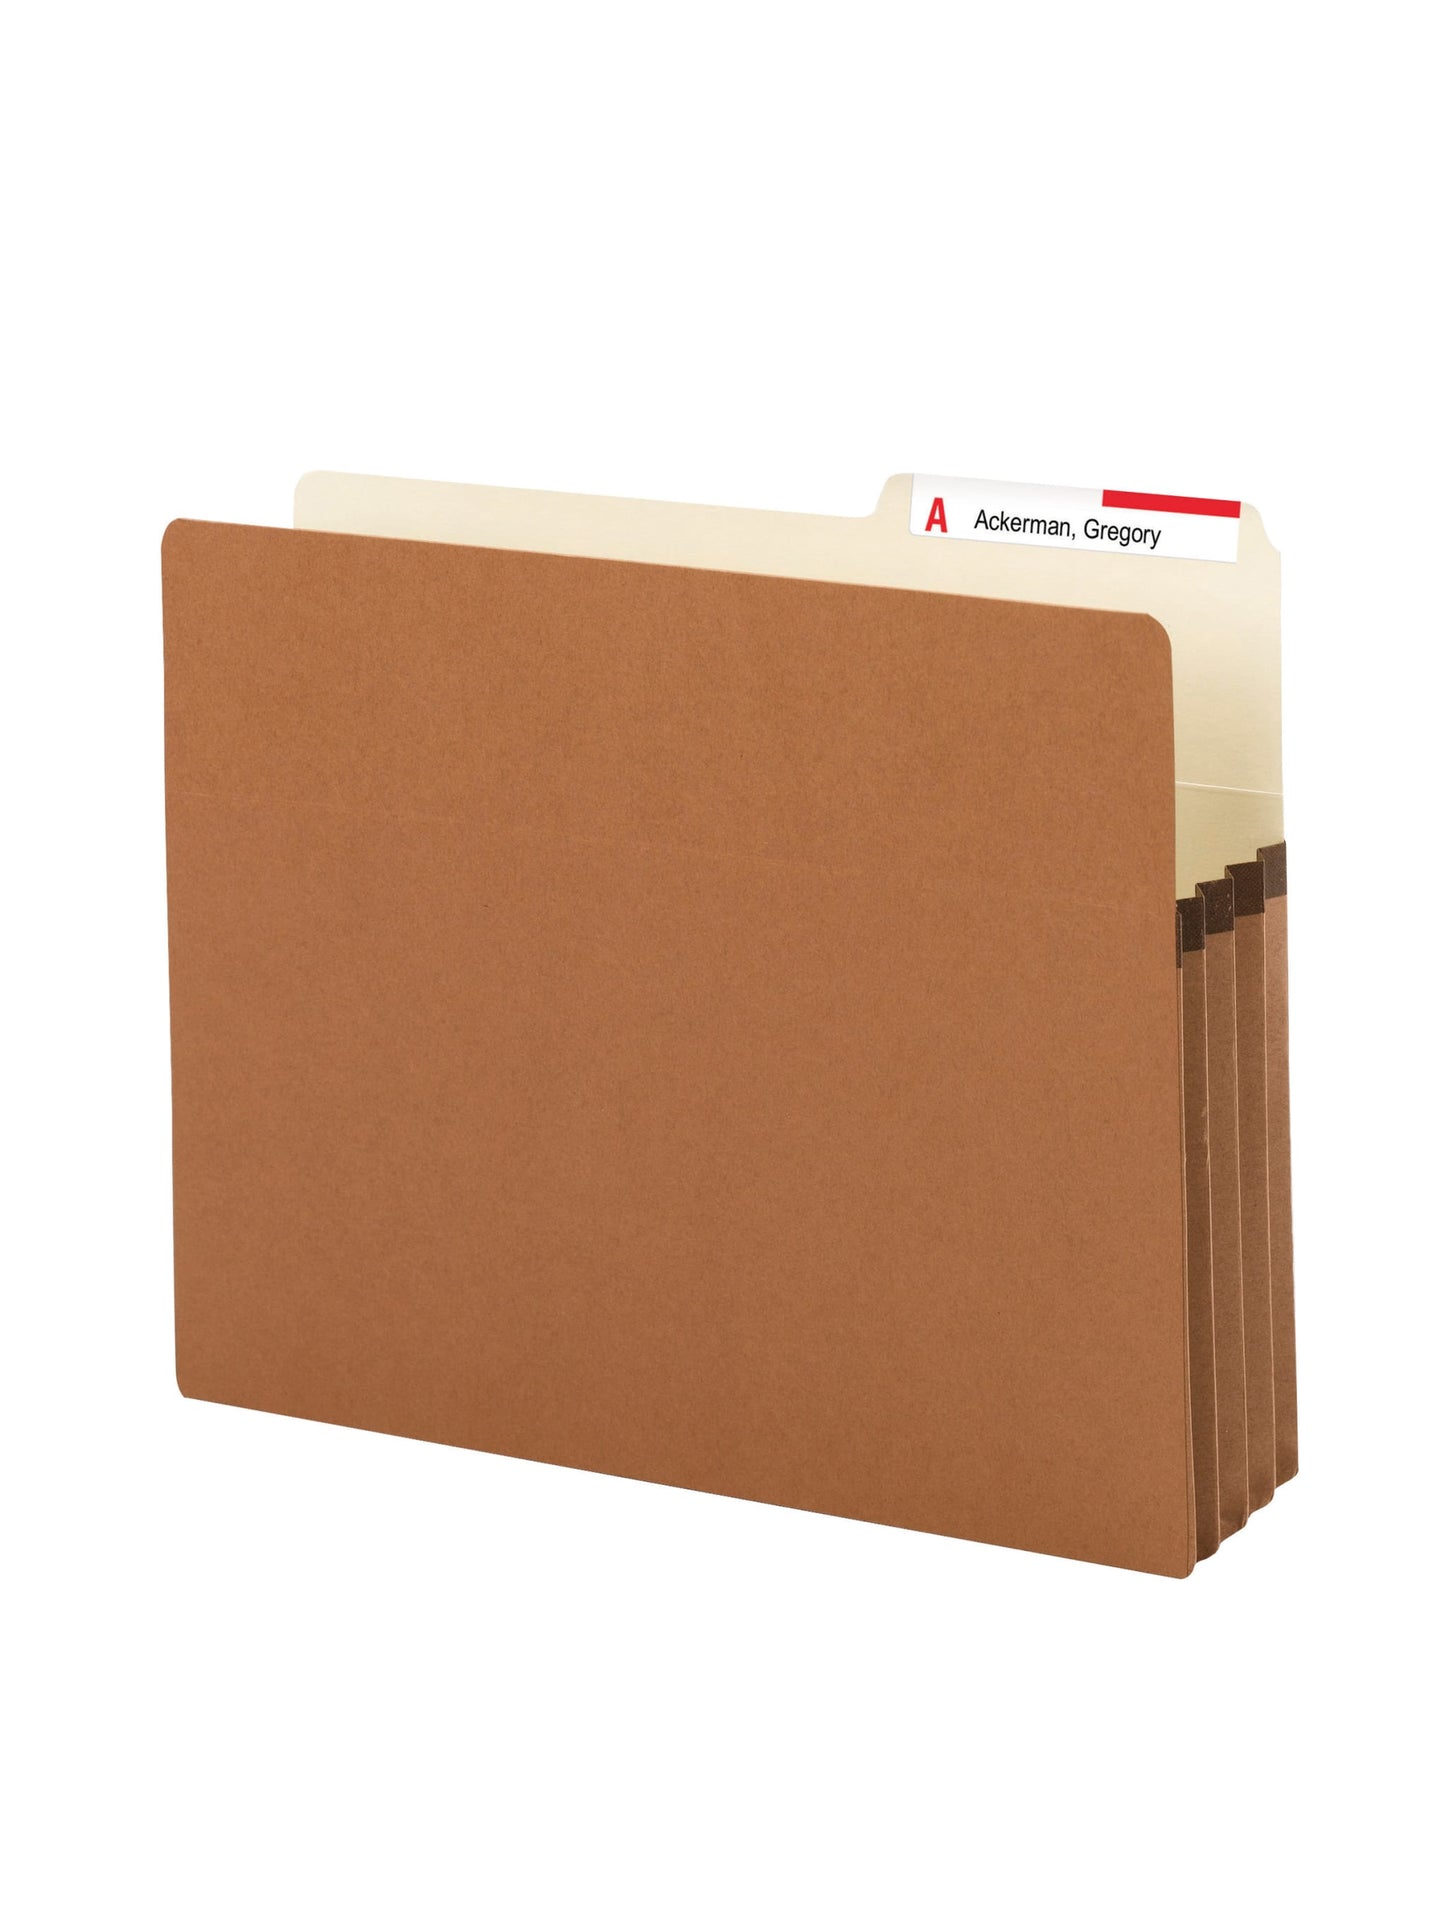 Redrope File Pockets, 2/5-Cut Tab, 3-1/2 inch Expansion, Redrope Color, Letter Size, Set of 0, 30086486730885